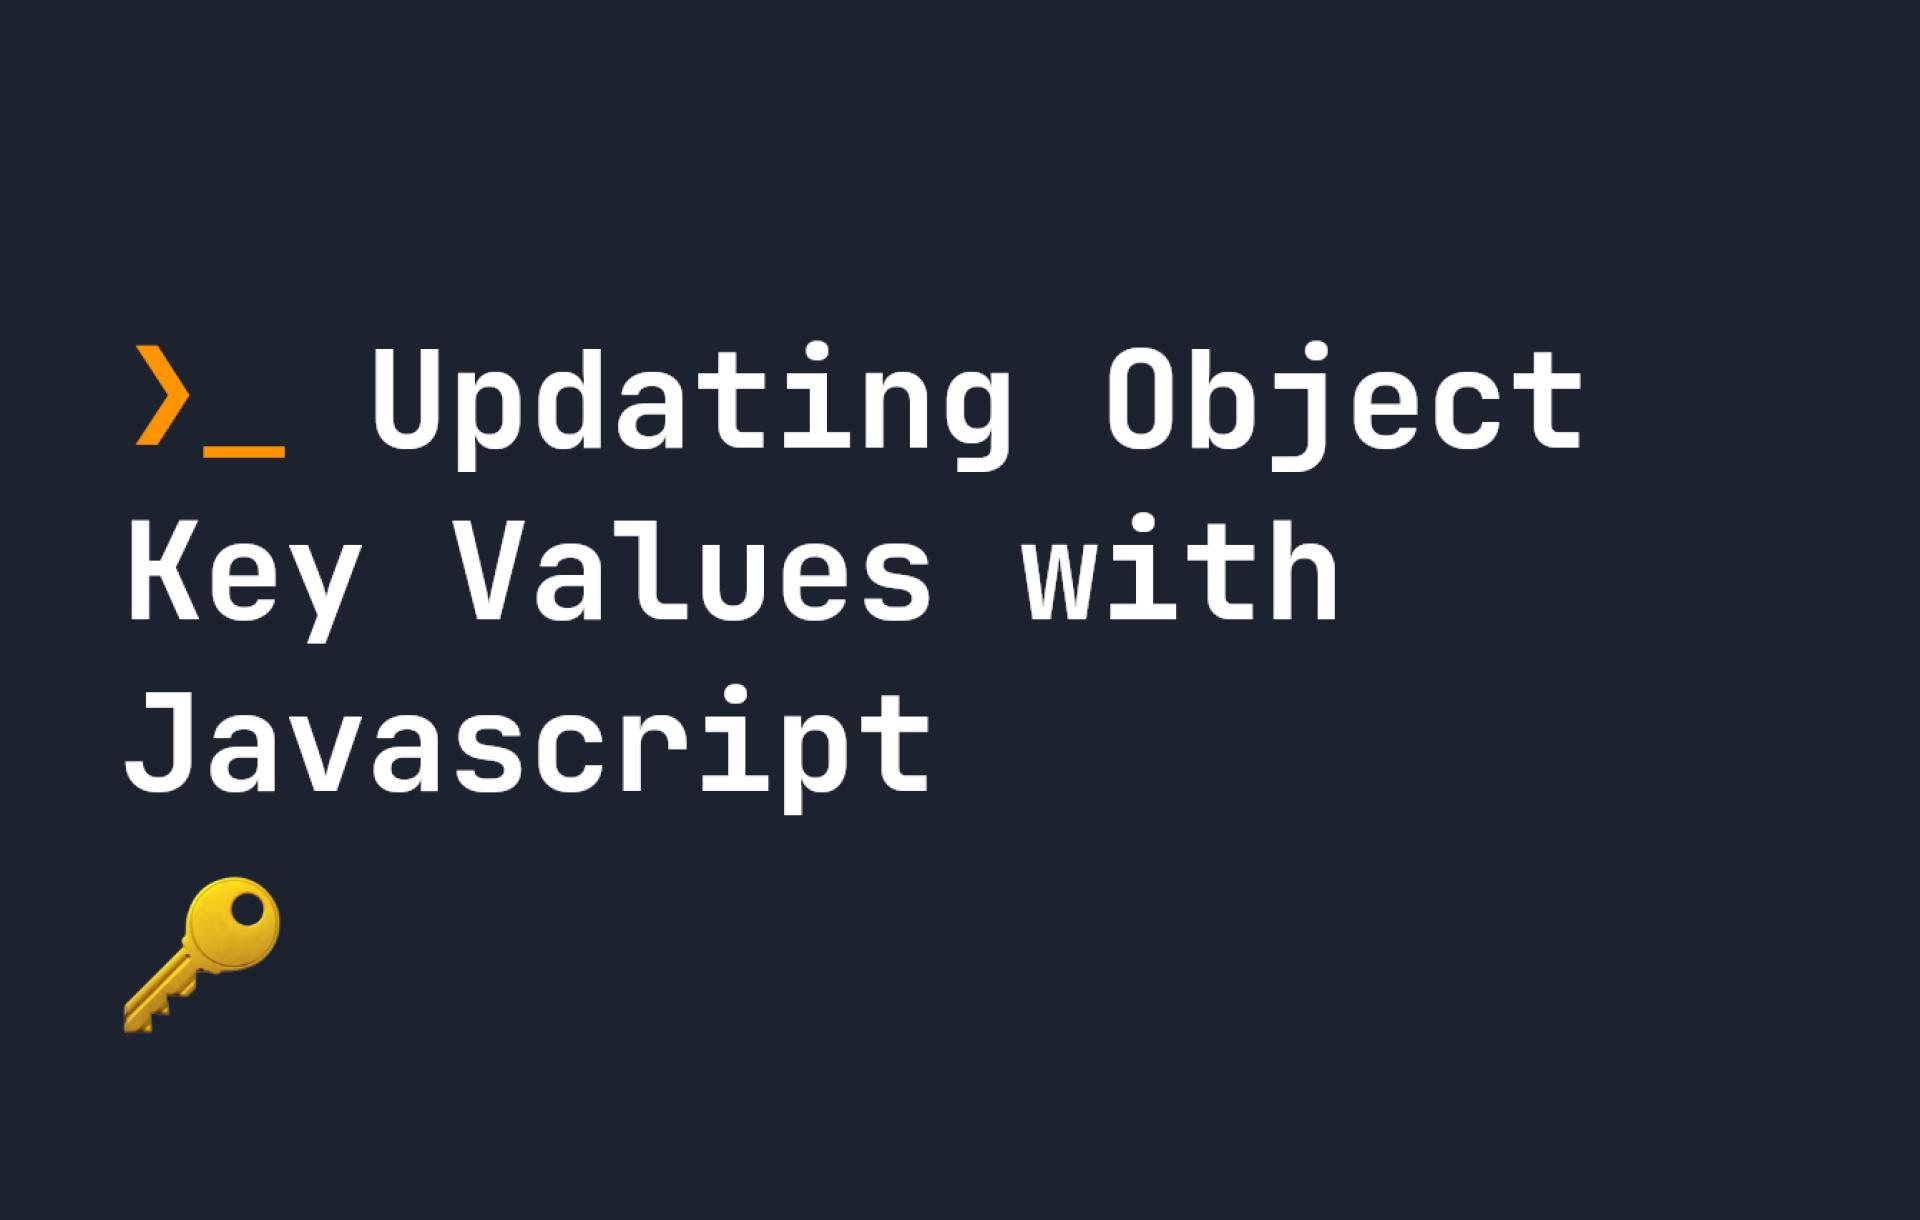 Updating Object Key Values with Javascript